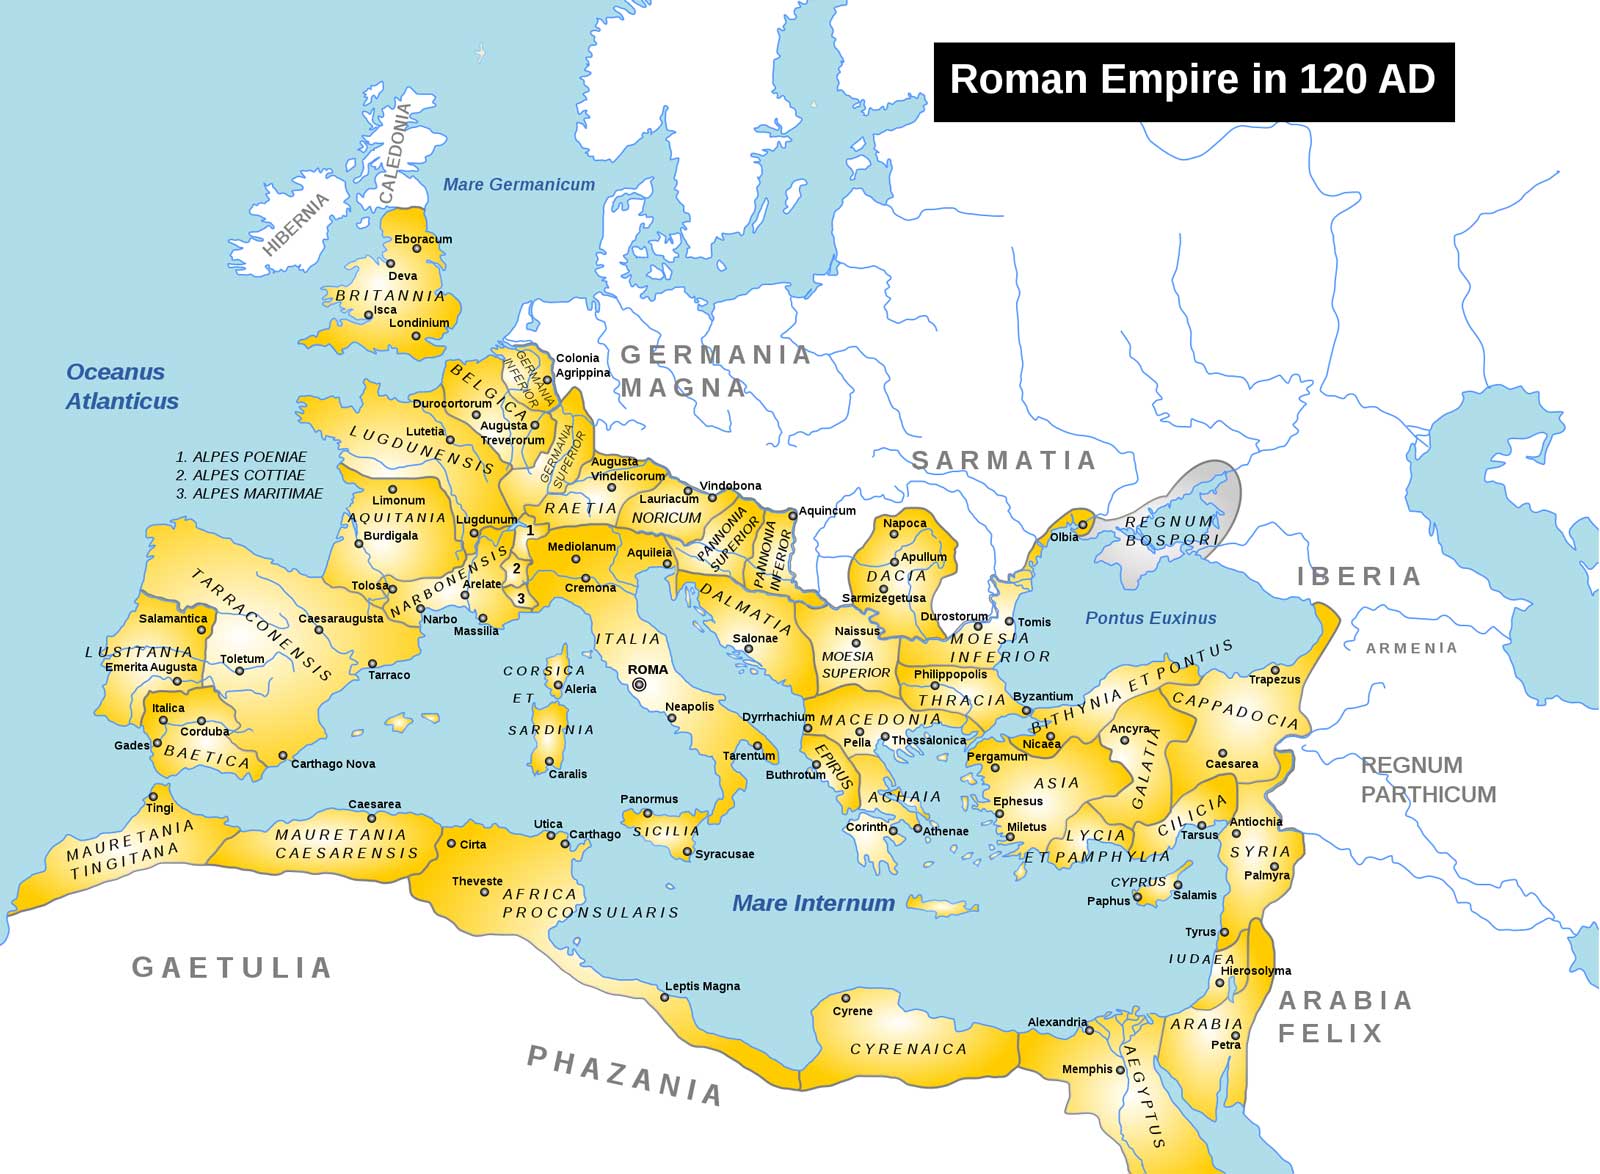 This map shows how far the Roman Empire stretched at its height, around 120 AD.